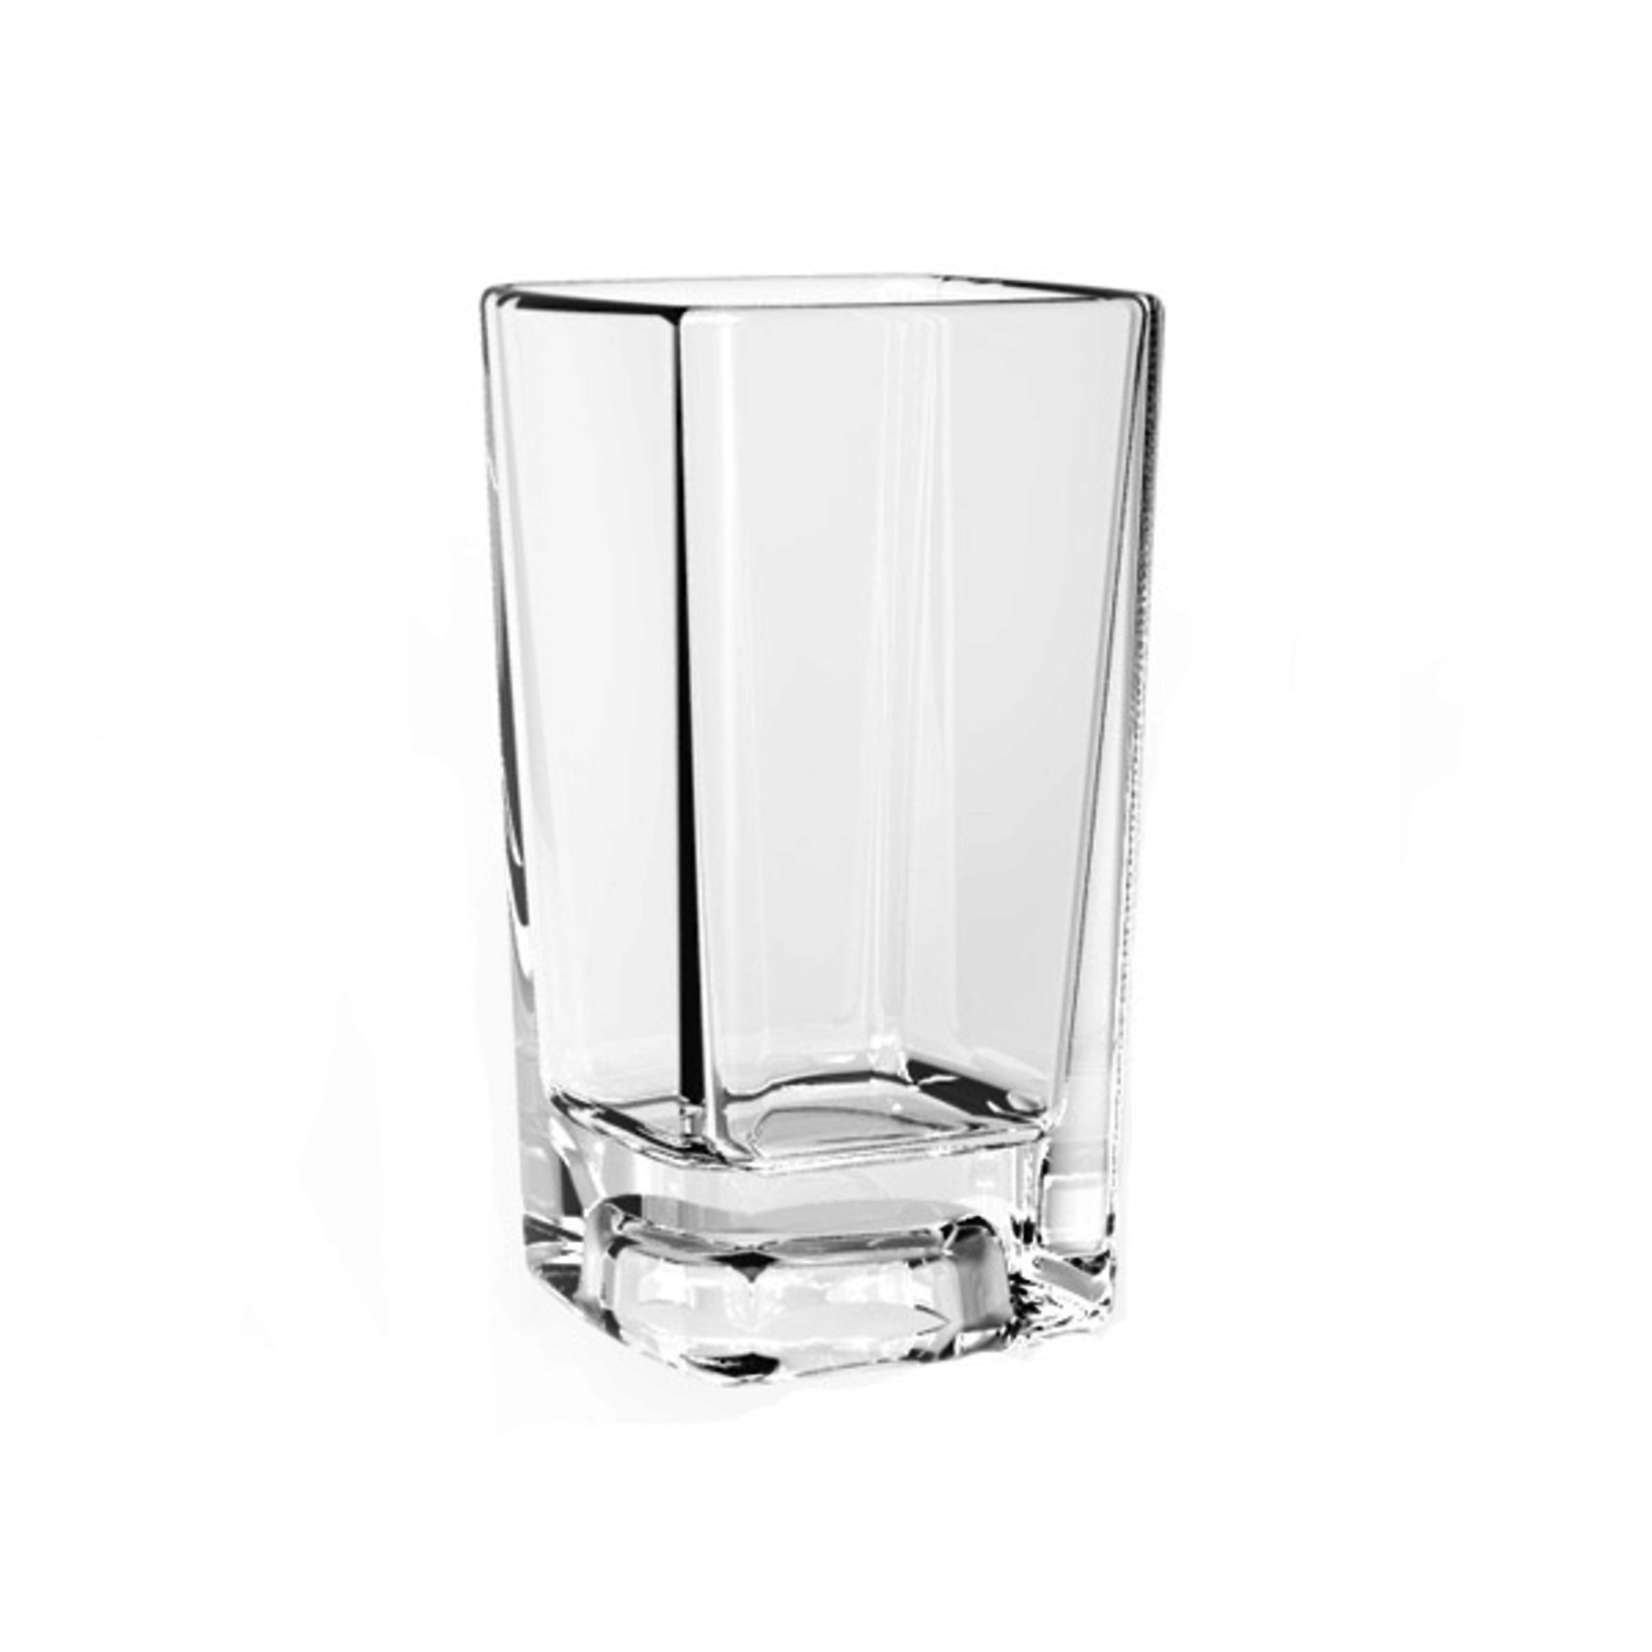 THUNDER GROUP, INC Special order PLTHSG130SC Thunder 3 oz Shot Glass, Square, Heavy Base, Polycarbonate, Clear